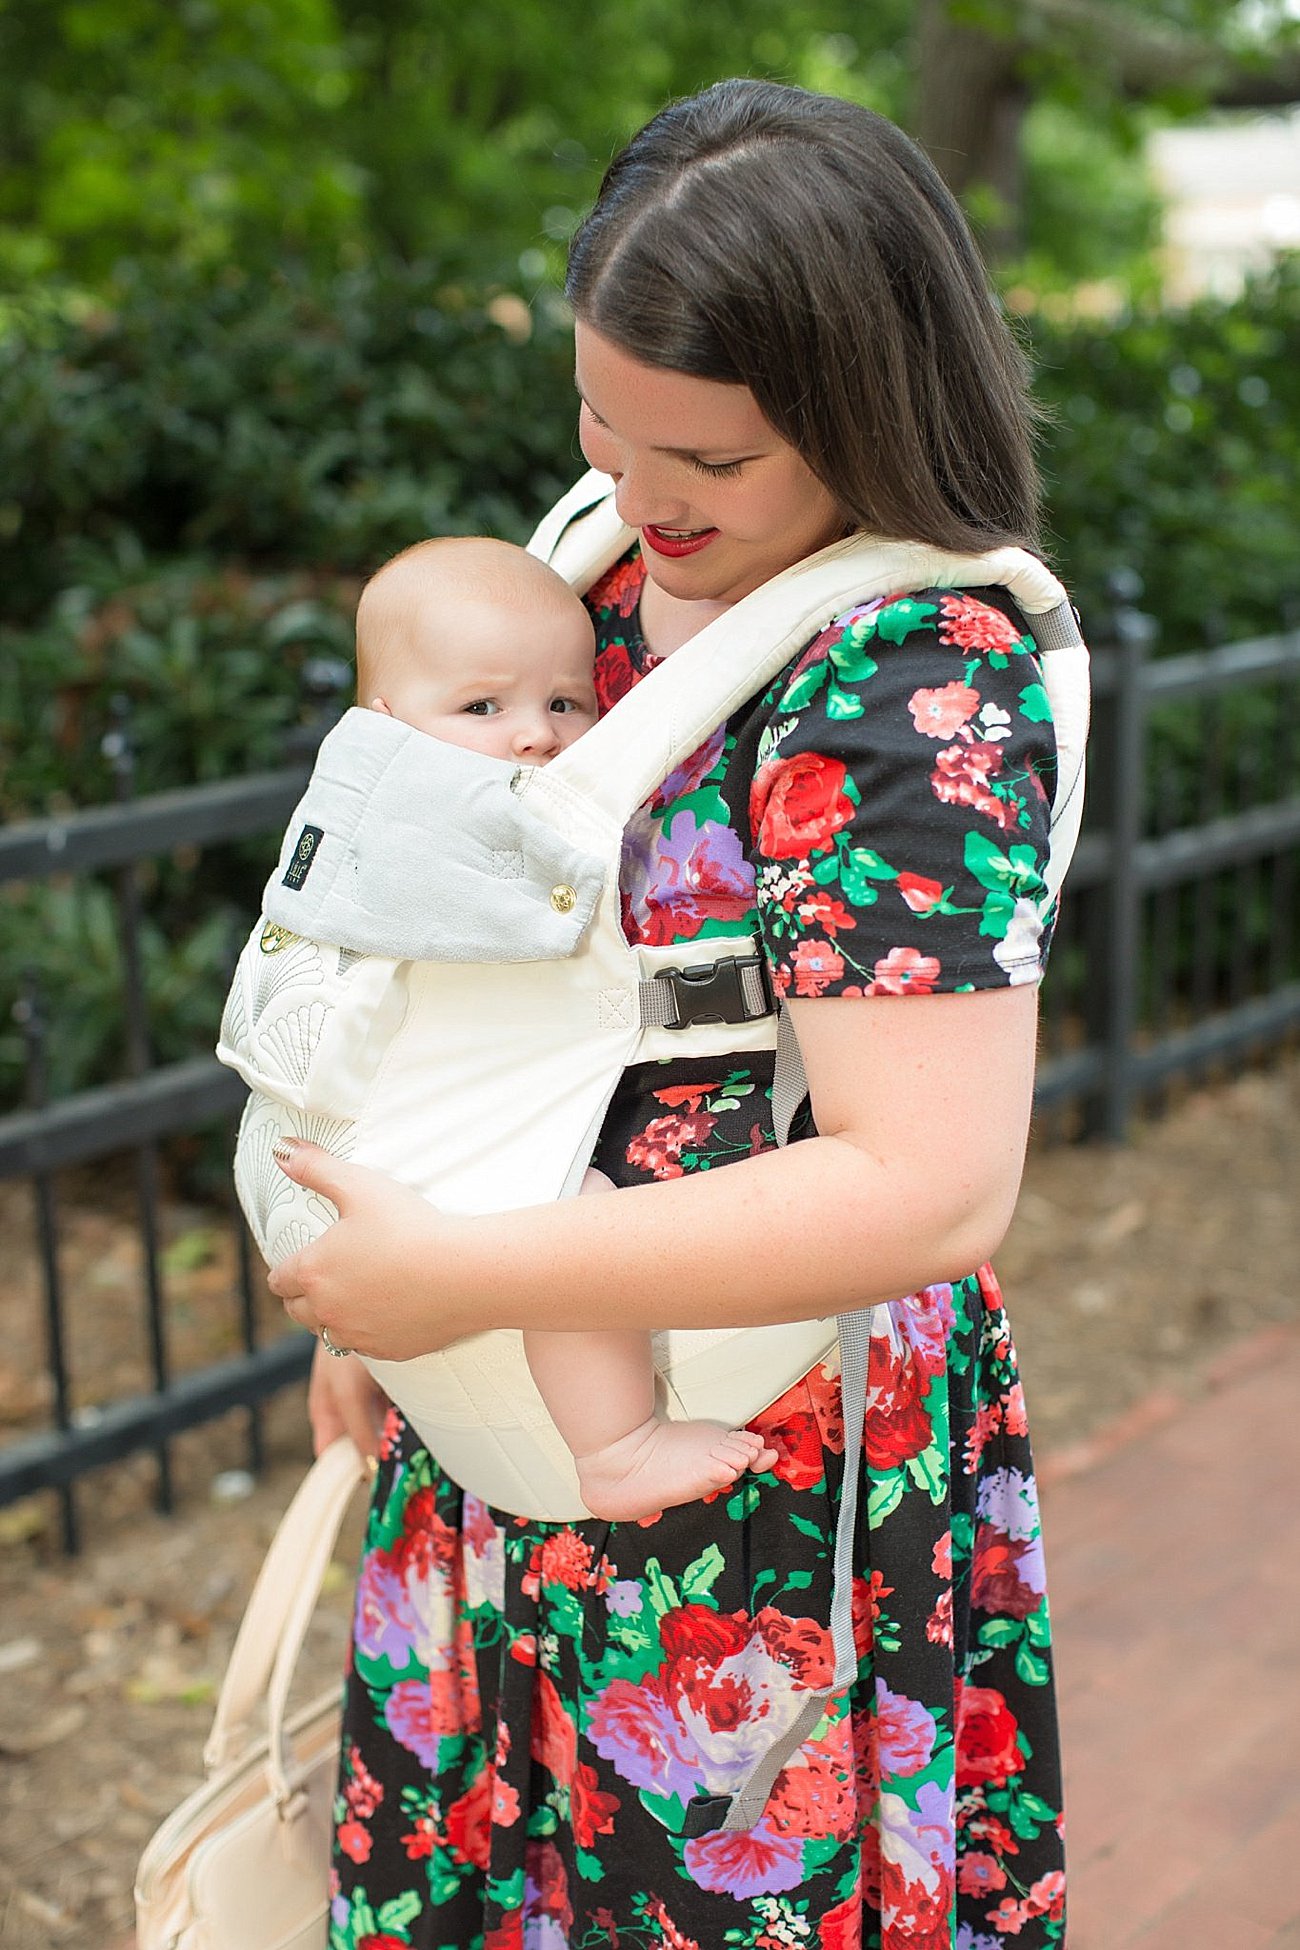 LulaRoe floral Amelia dress, Lillebaby Complete Embossed Luxe carrier in Brilliance, The Root Collective shoes, Kalencom "Berlin" Diaper Bag | North Carolina Fashion Blogger (13)